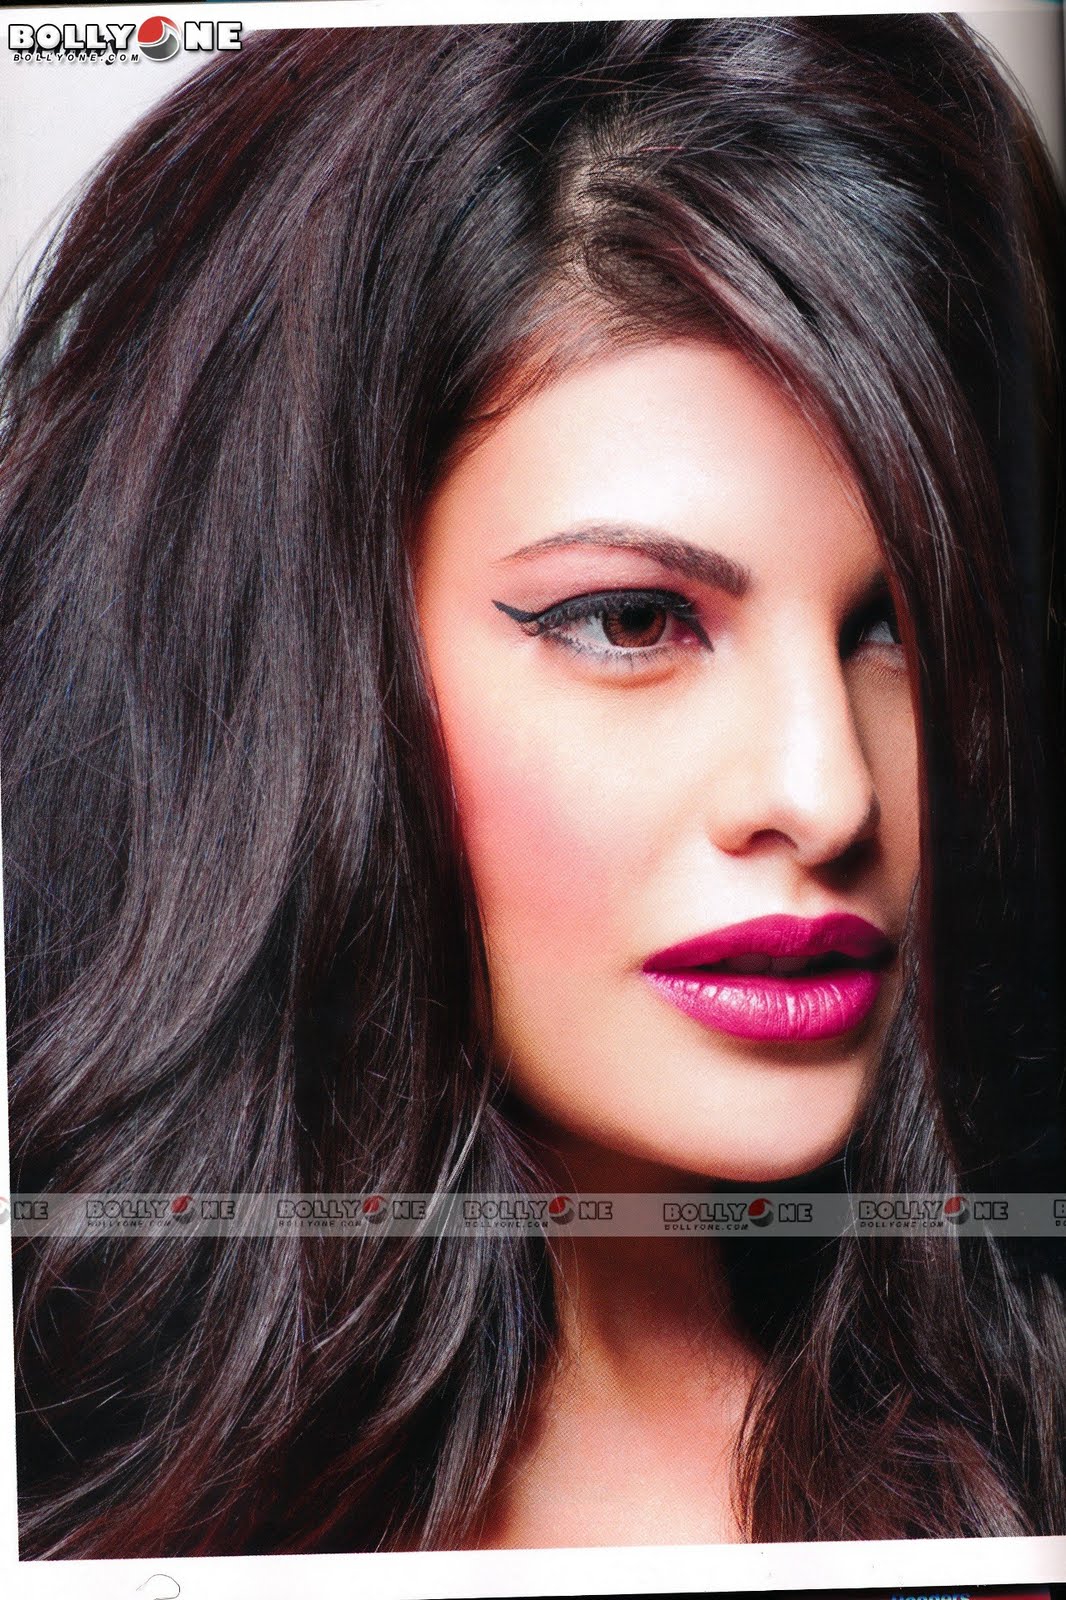  Jacqueline Fernandez -  Jacqueline Fernandez COSMOPOLITAN Magazine May 2011 HQ Pictures